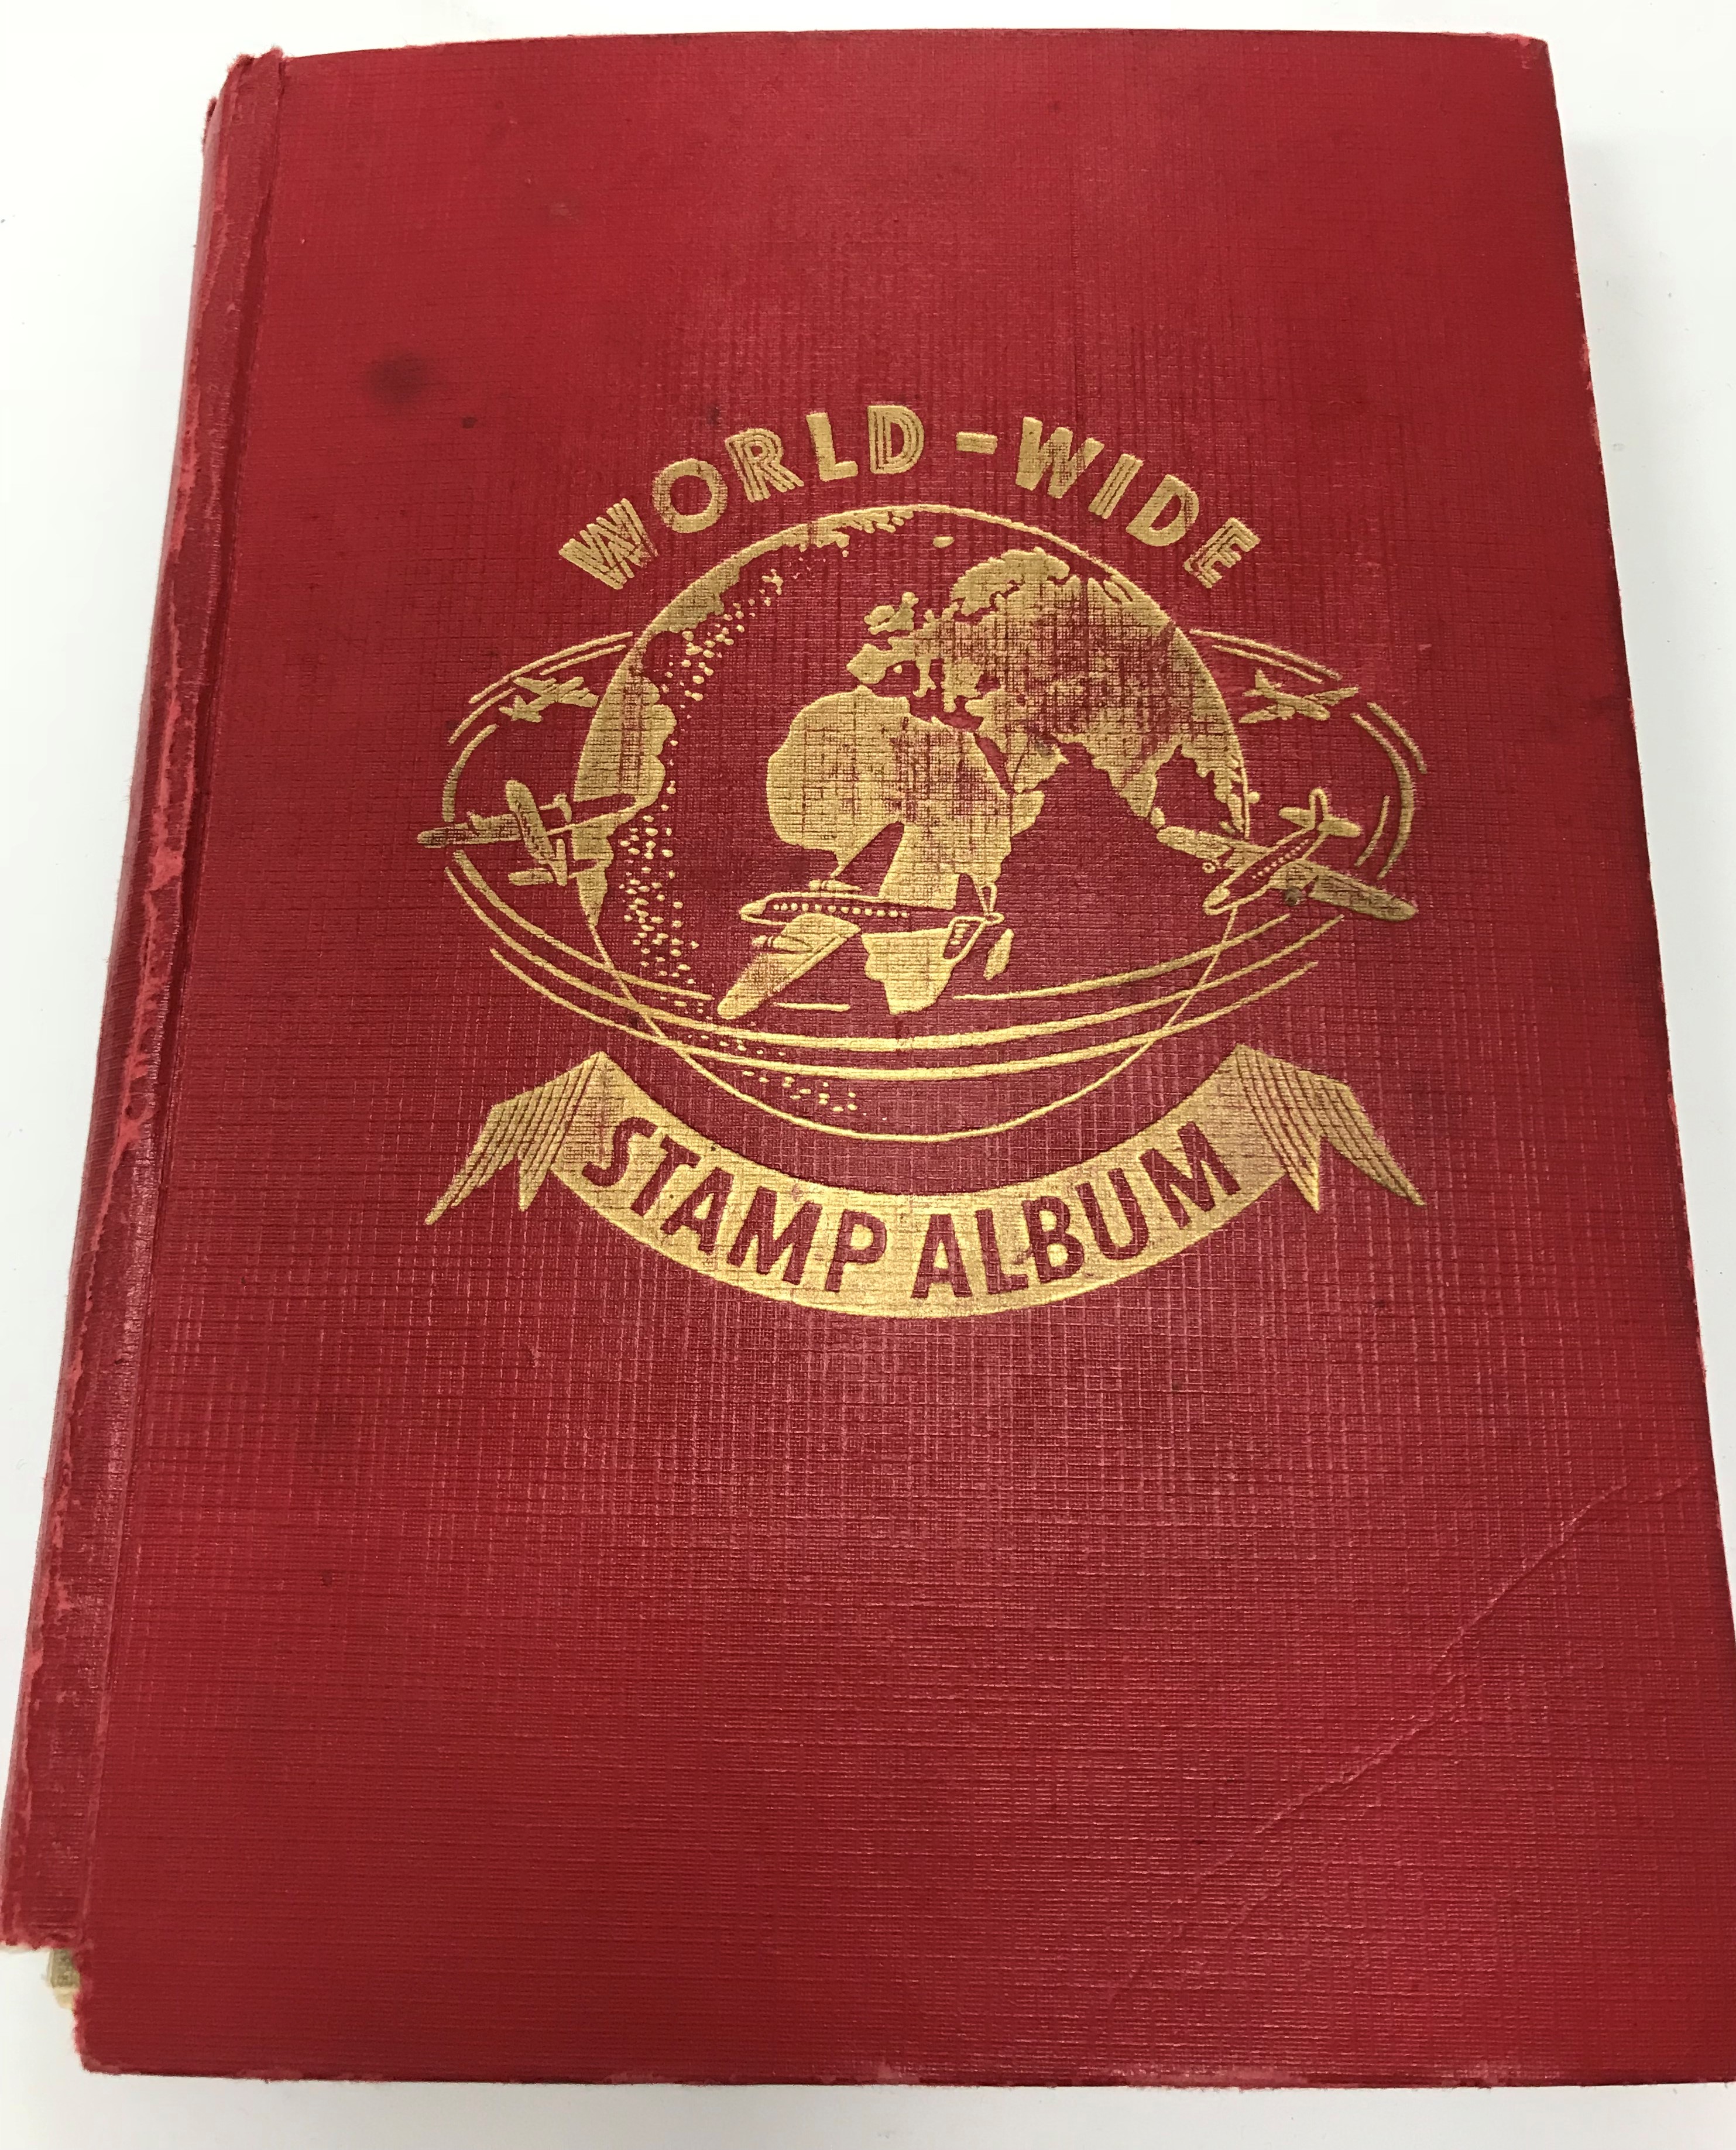 A collection of stamp albums containing various stamps of the world